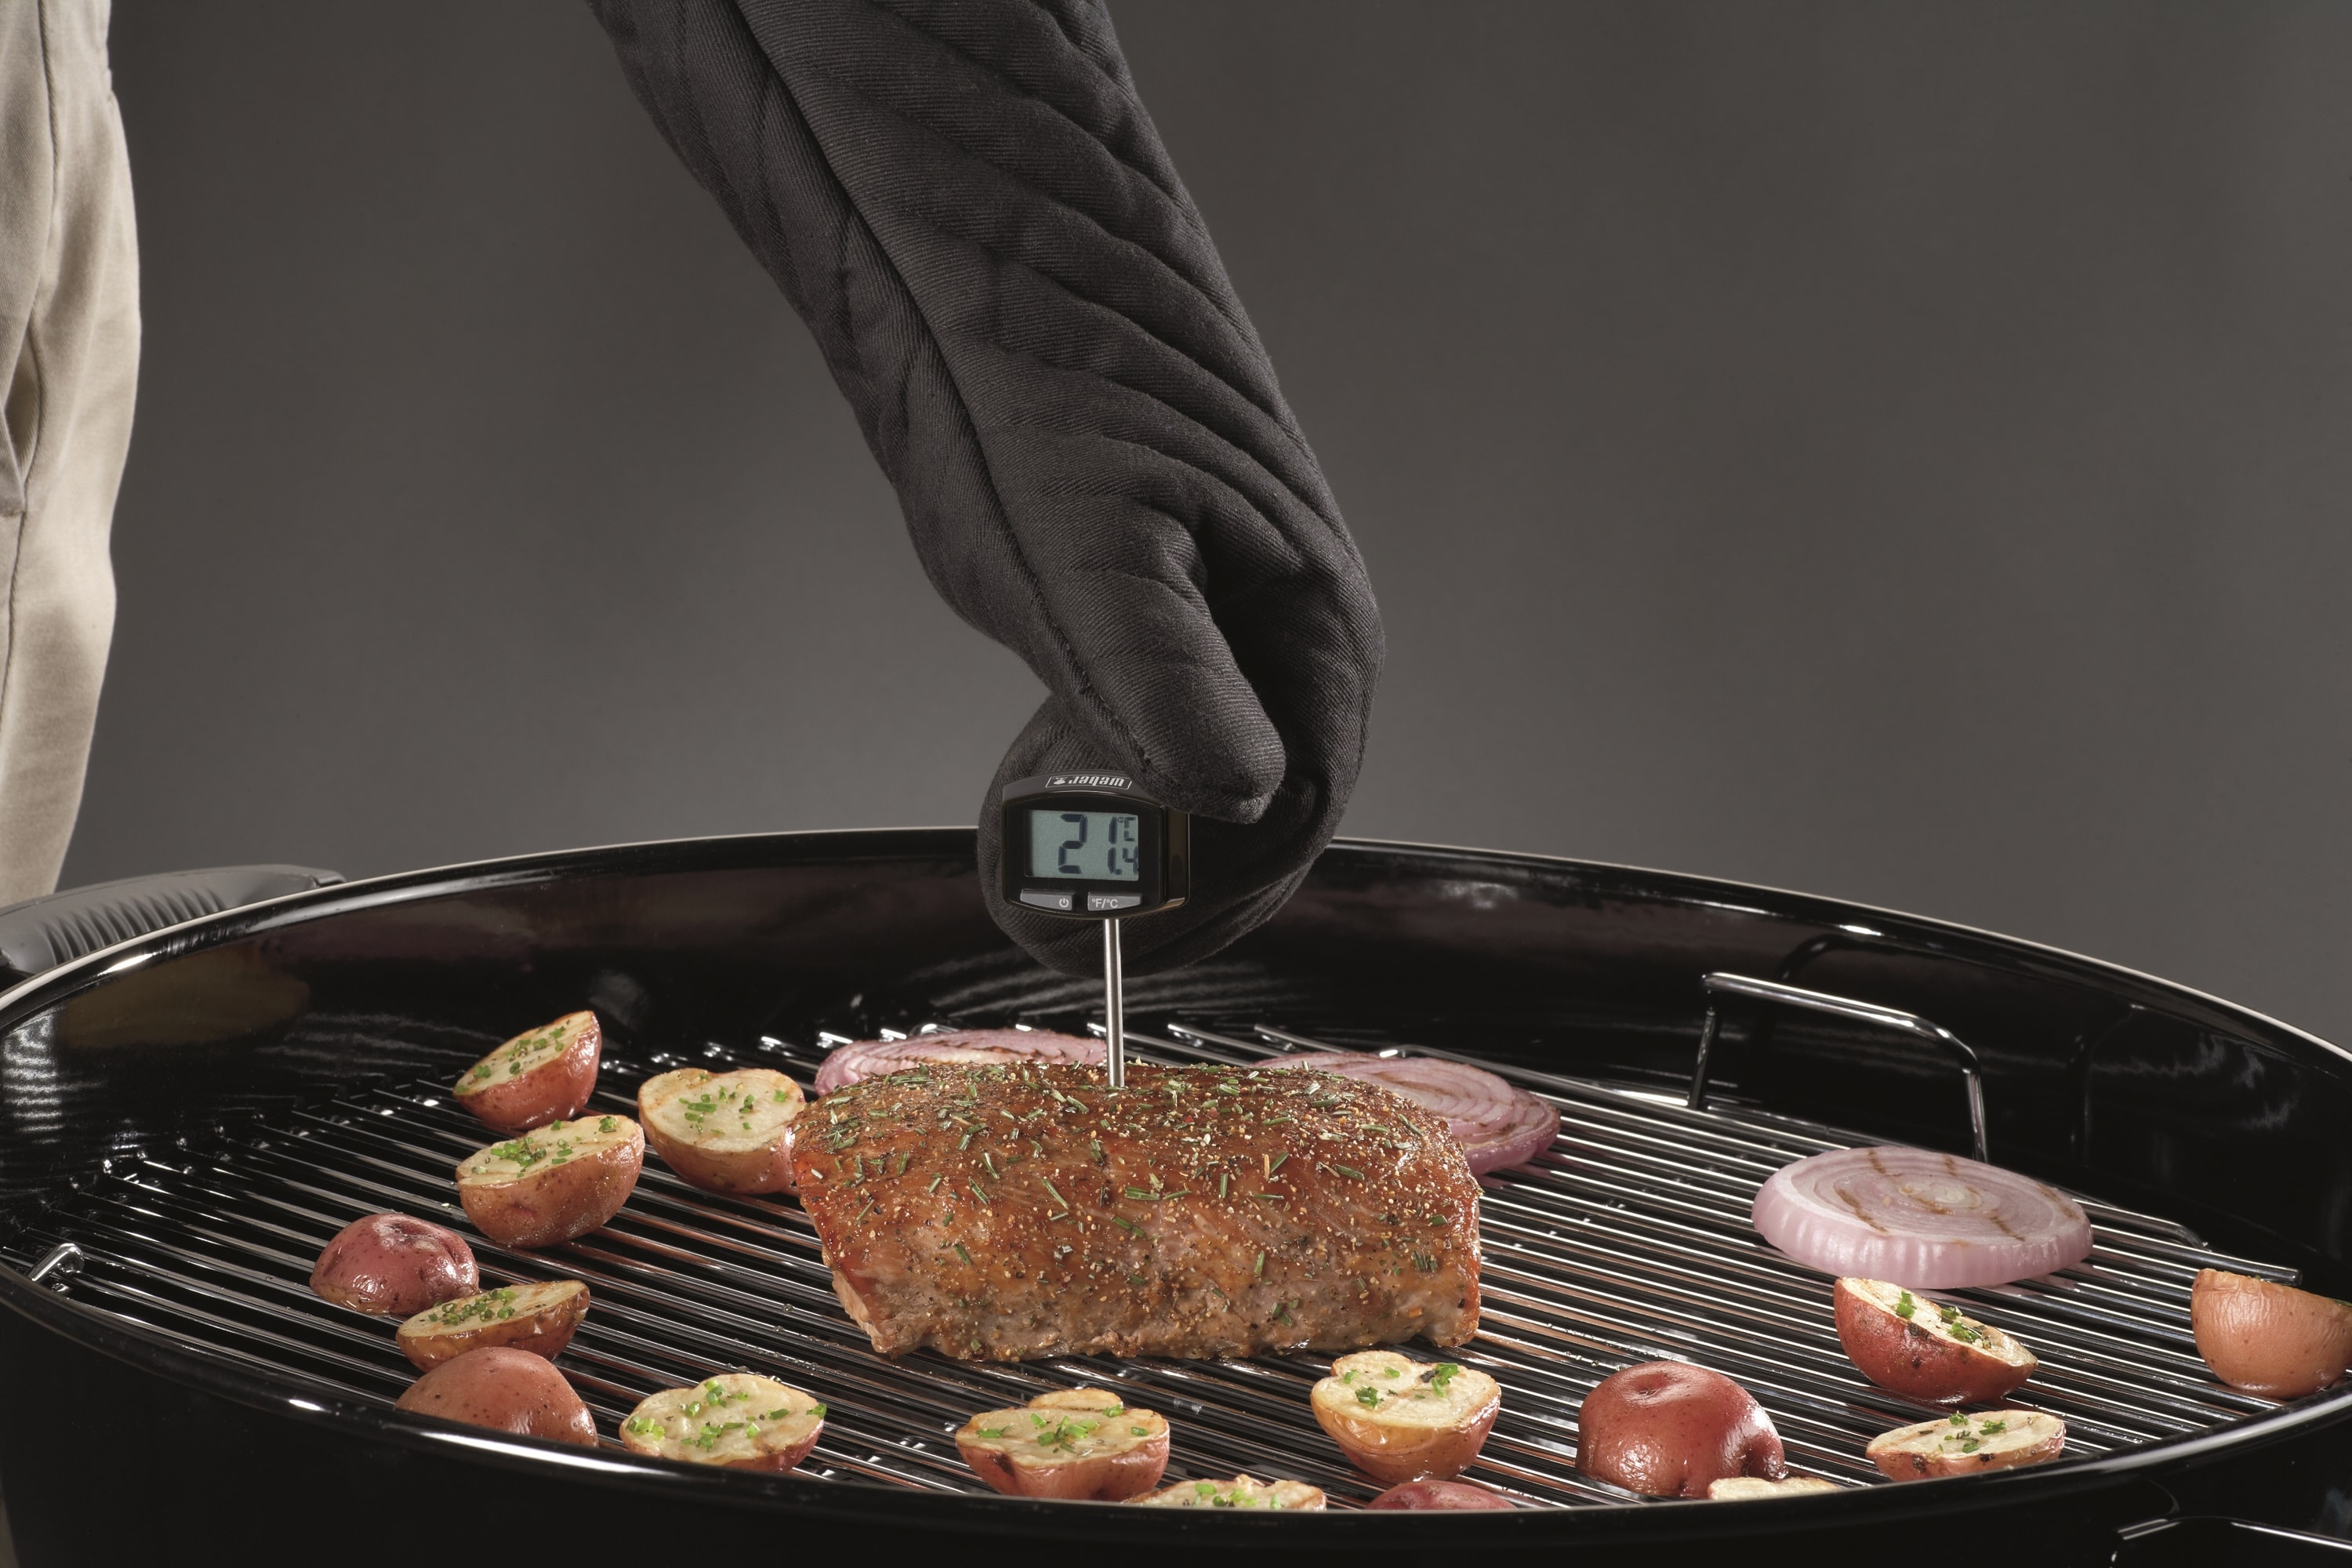 Grillmark 11391A Analog Stainless Steel Meat Thermometer